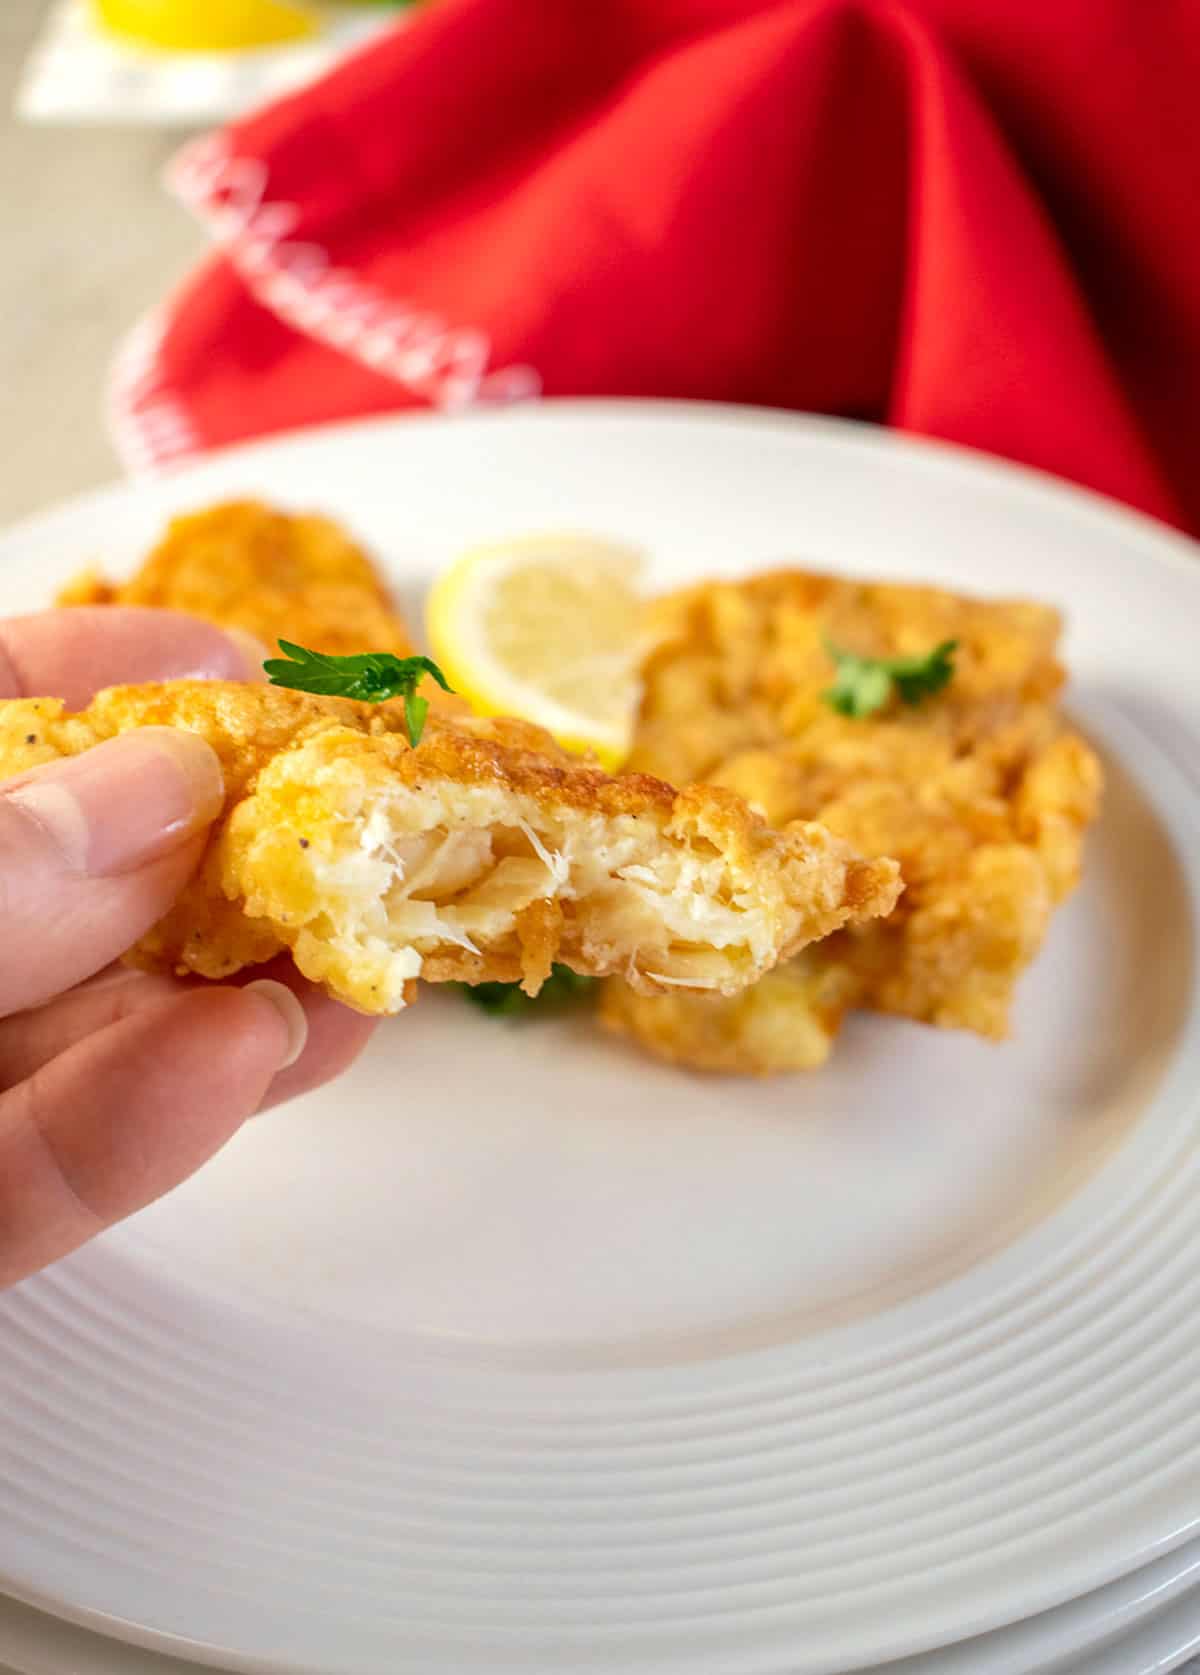 Photo of hand holding bitten piece of Fried Baccala (Salted Cod Fish)